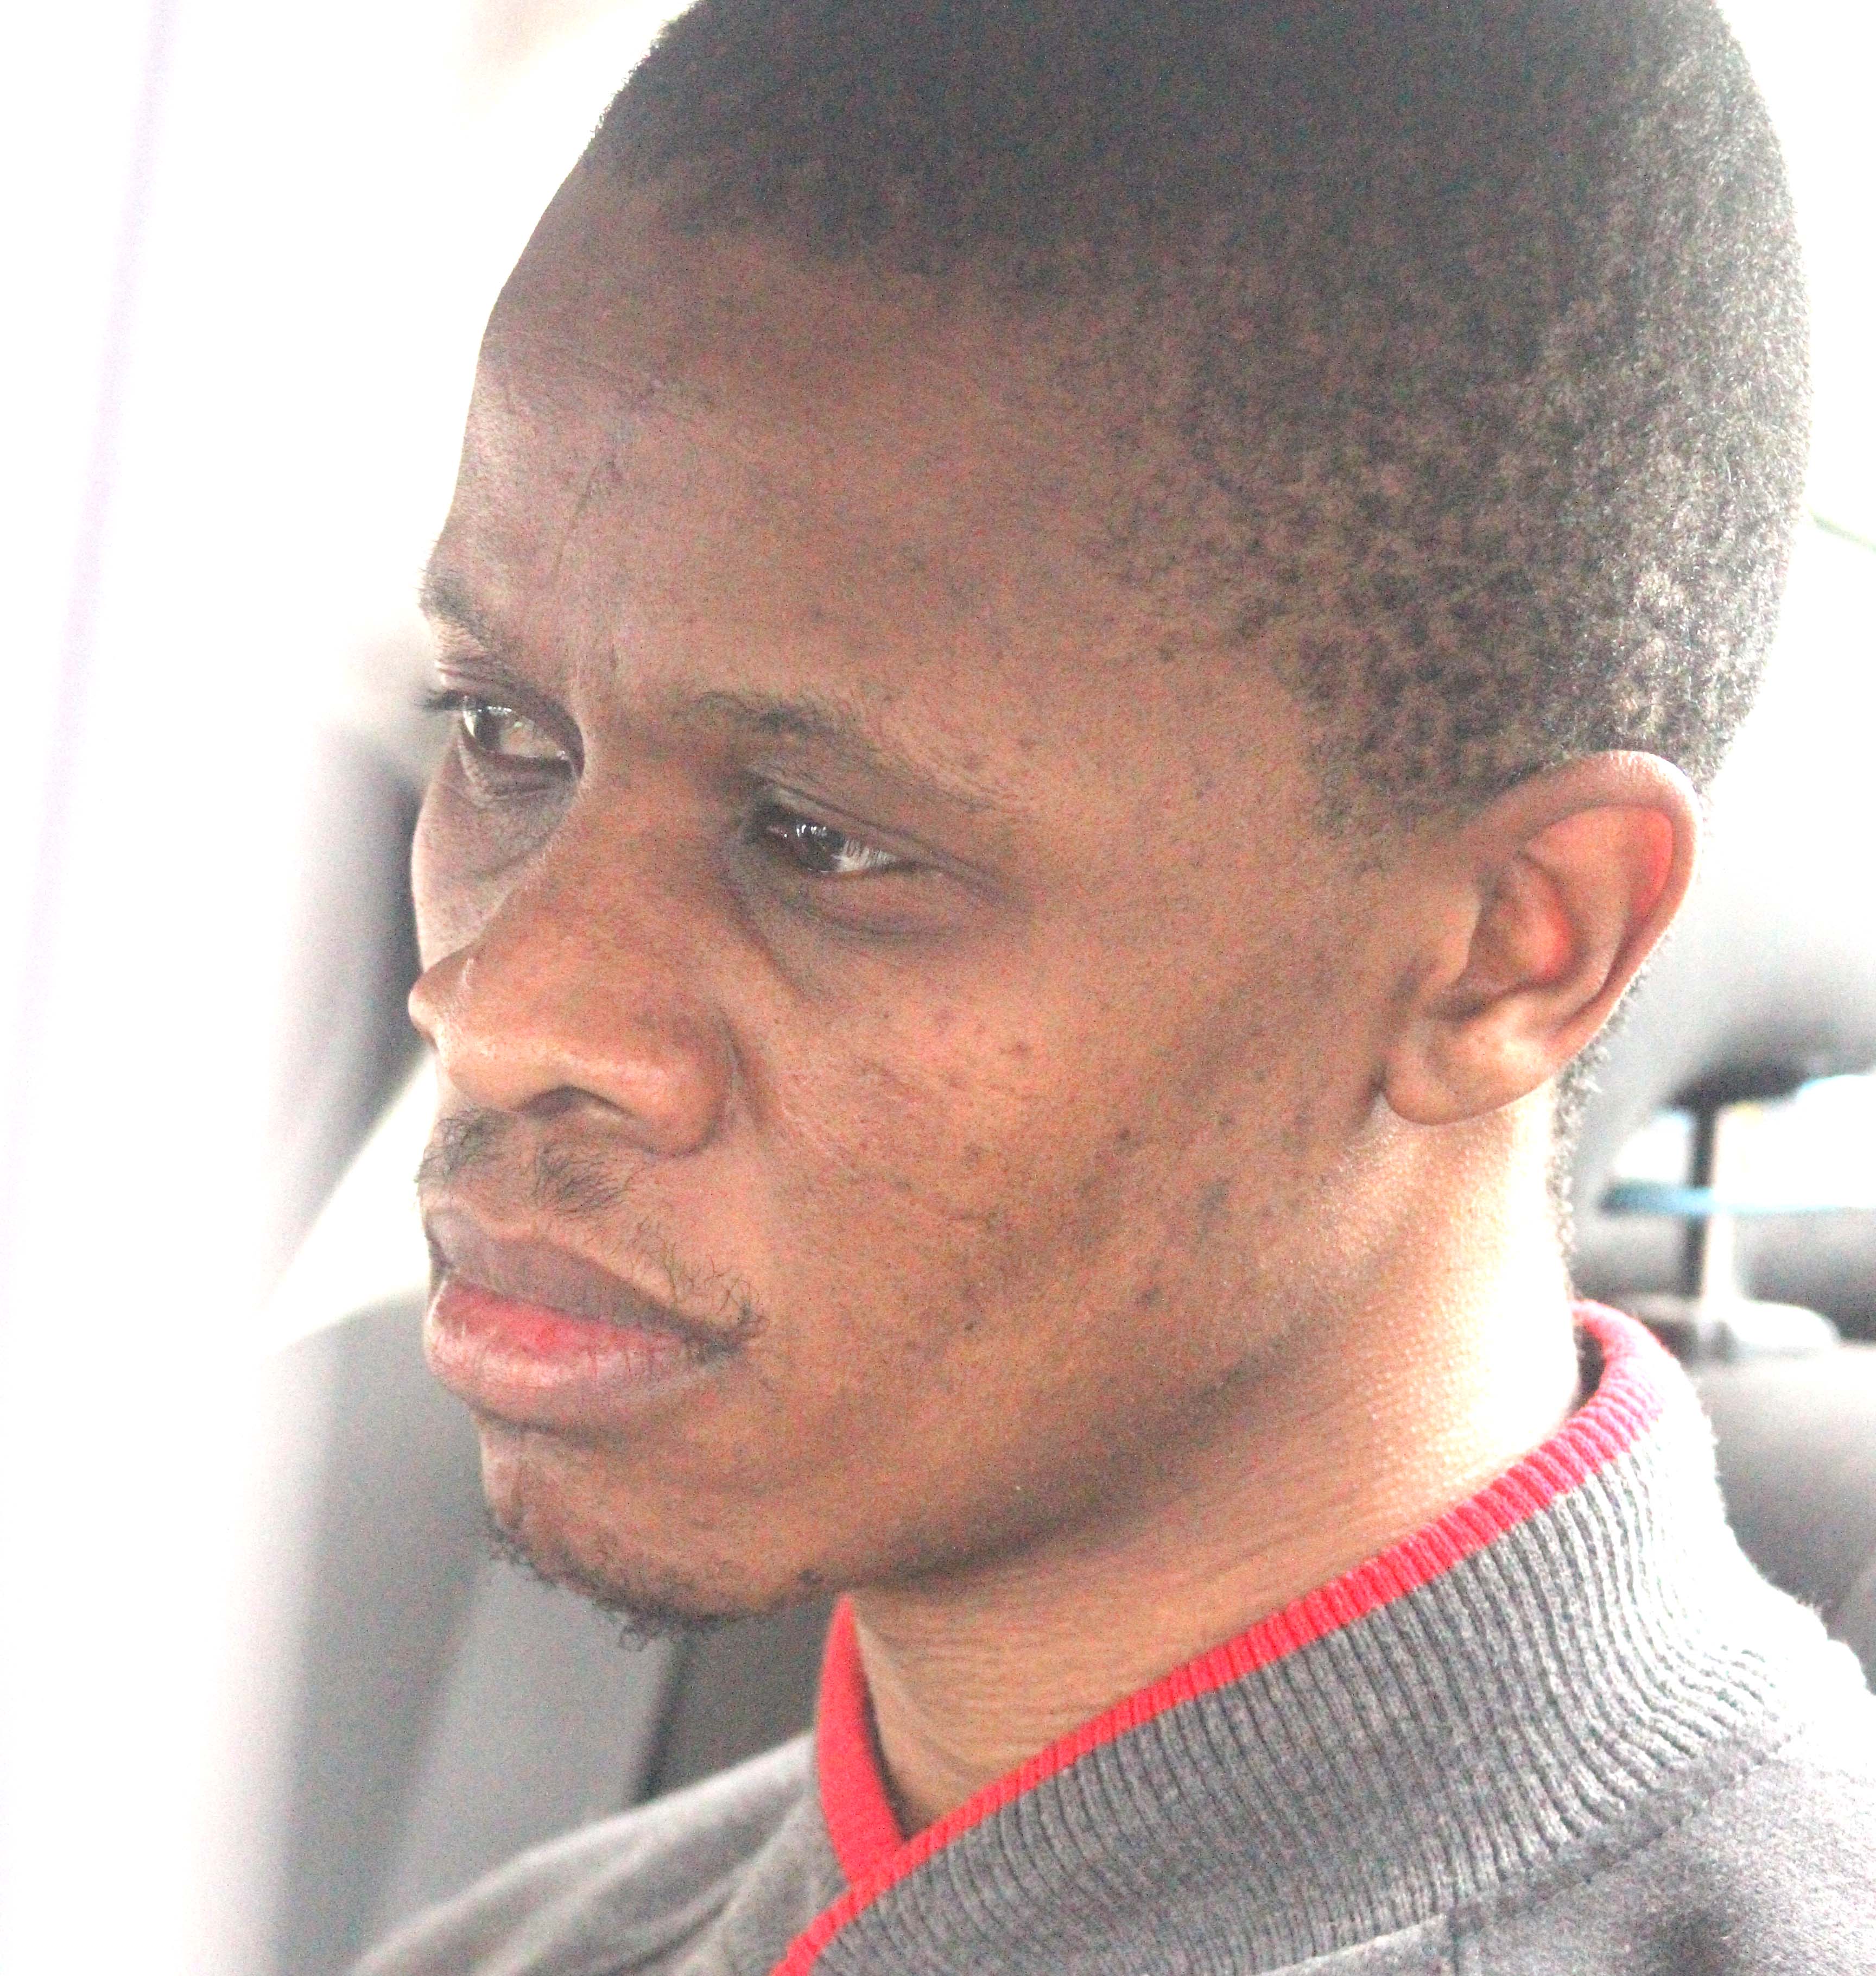 Double ritual murder suspect Lehlohonolo Scott was extradited from South Africa midmorning yesterday amid tight security - Scott